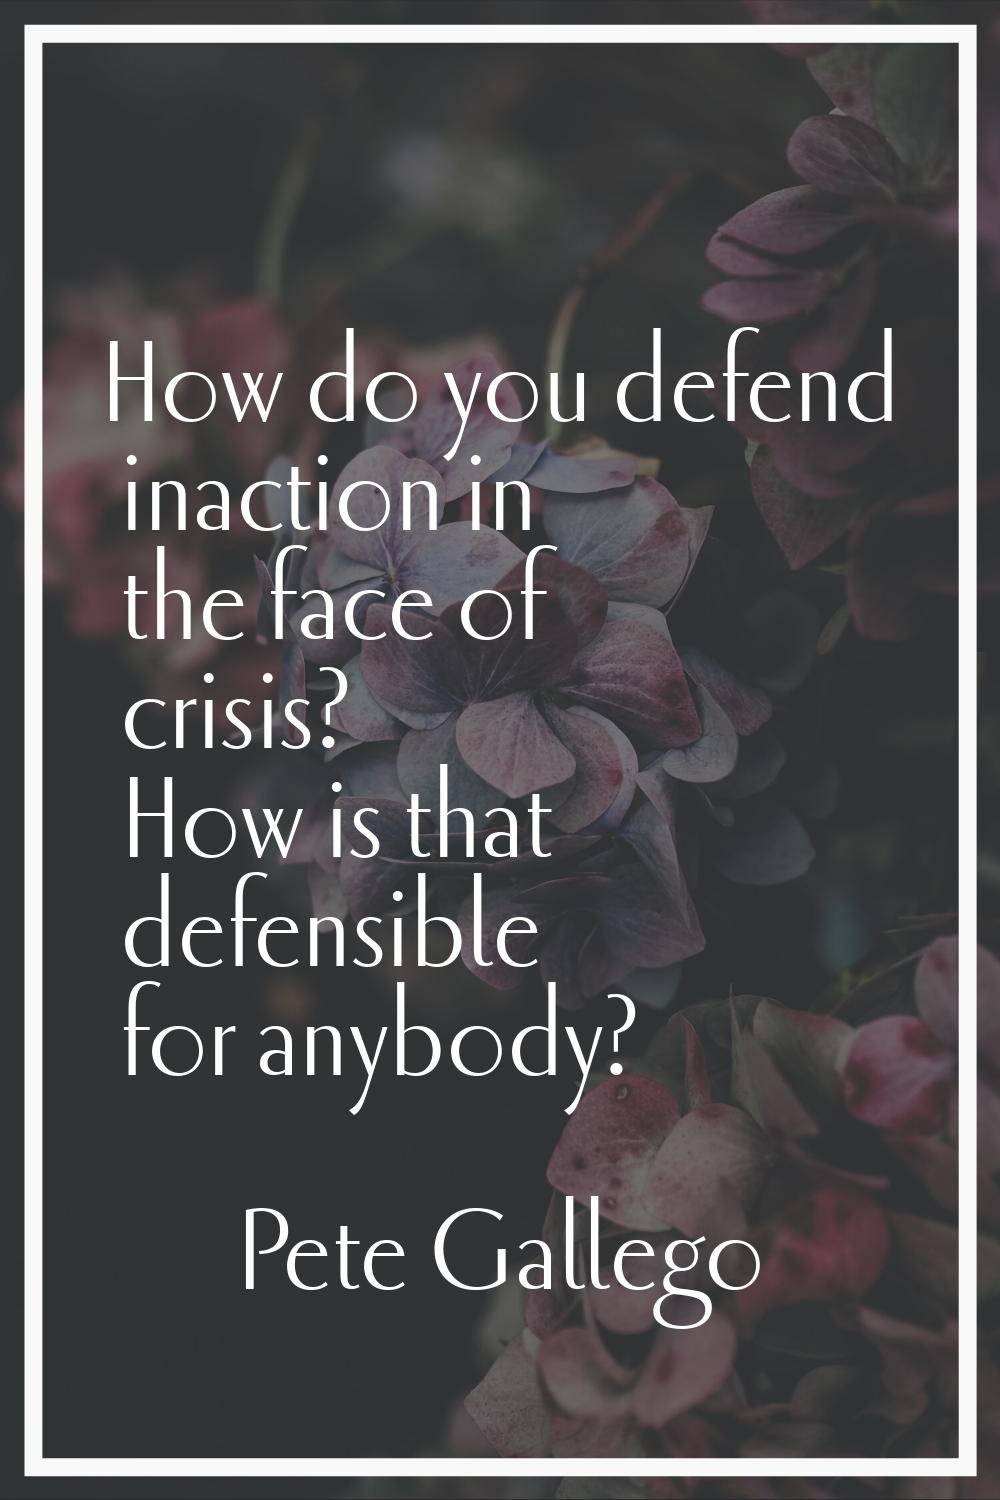 How do you defend inaction in the face of crisis? How is that defensible for anybody?